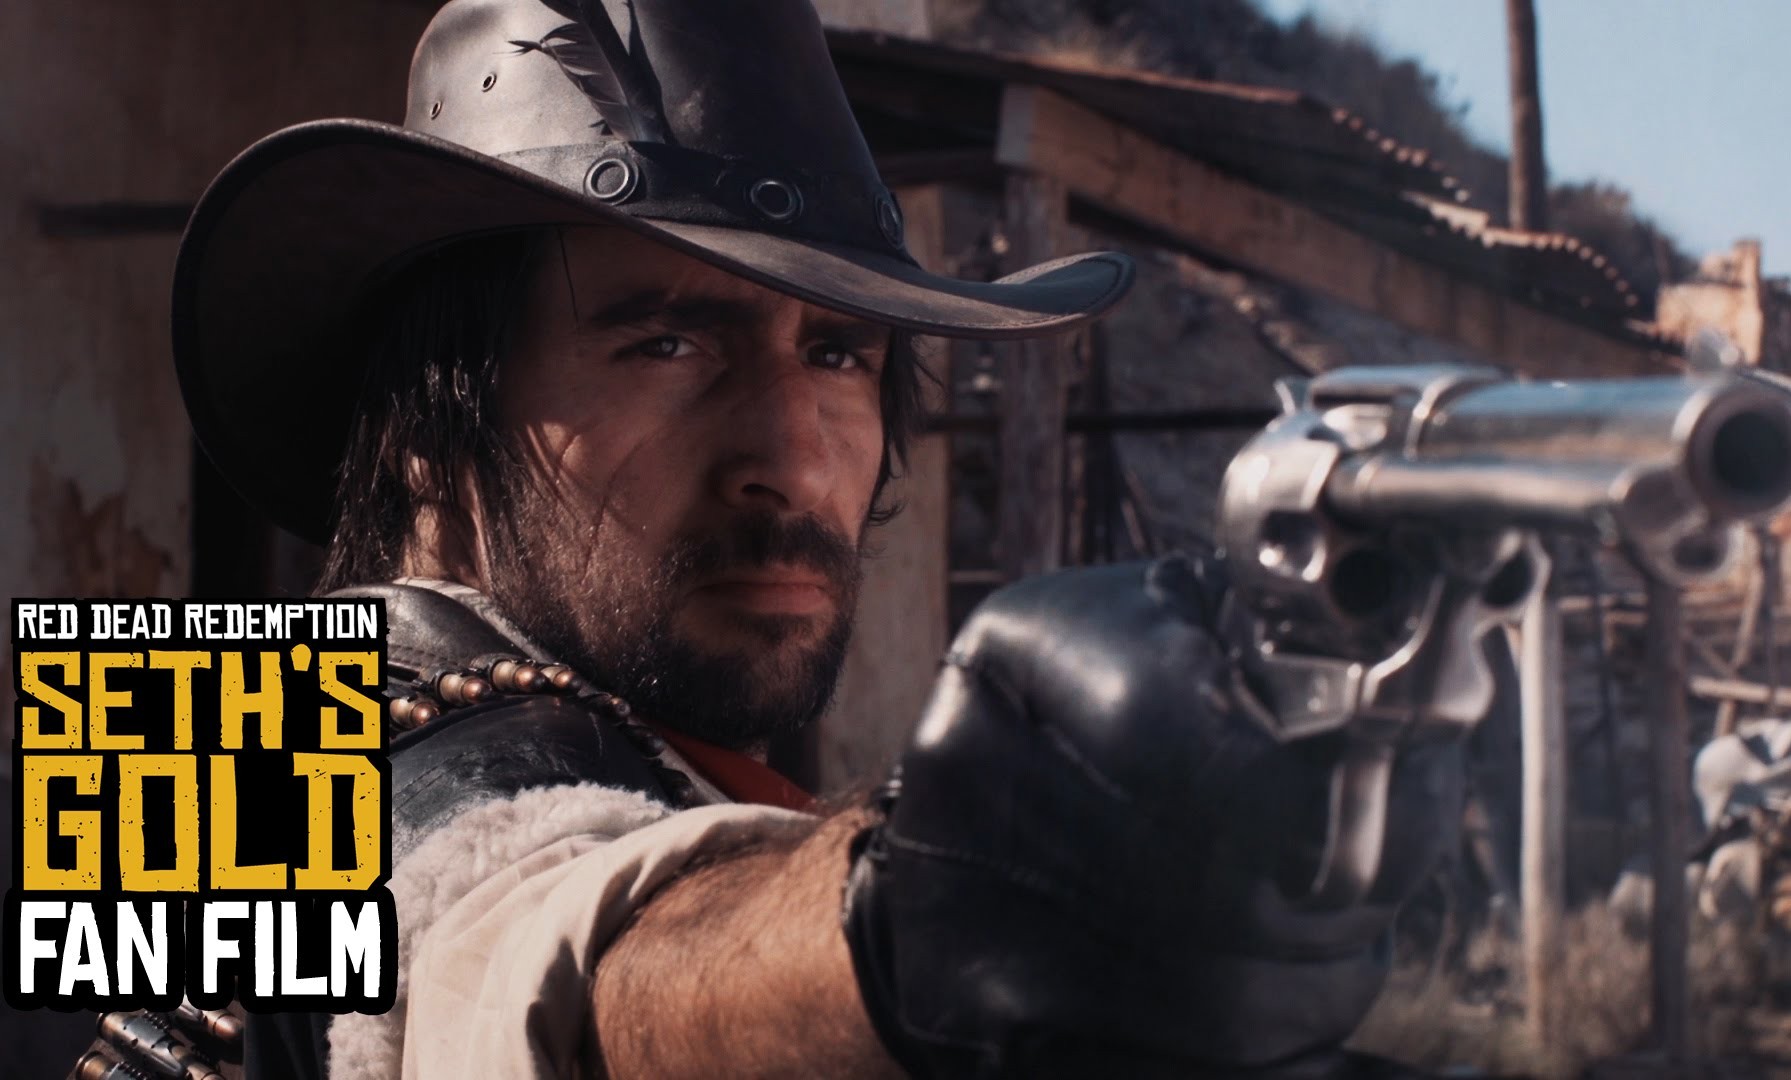 RED DEAD REDEMPTION: SETH’S GOLD